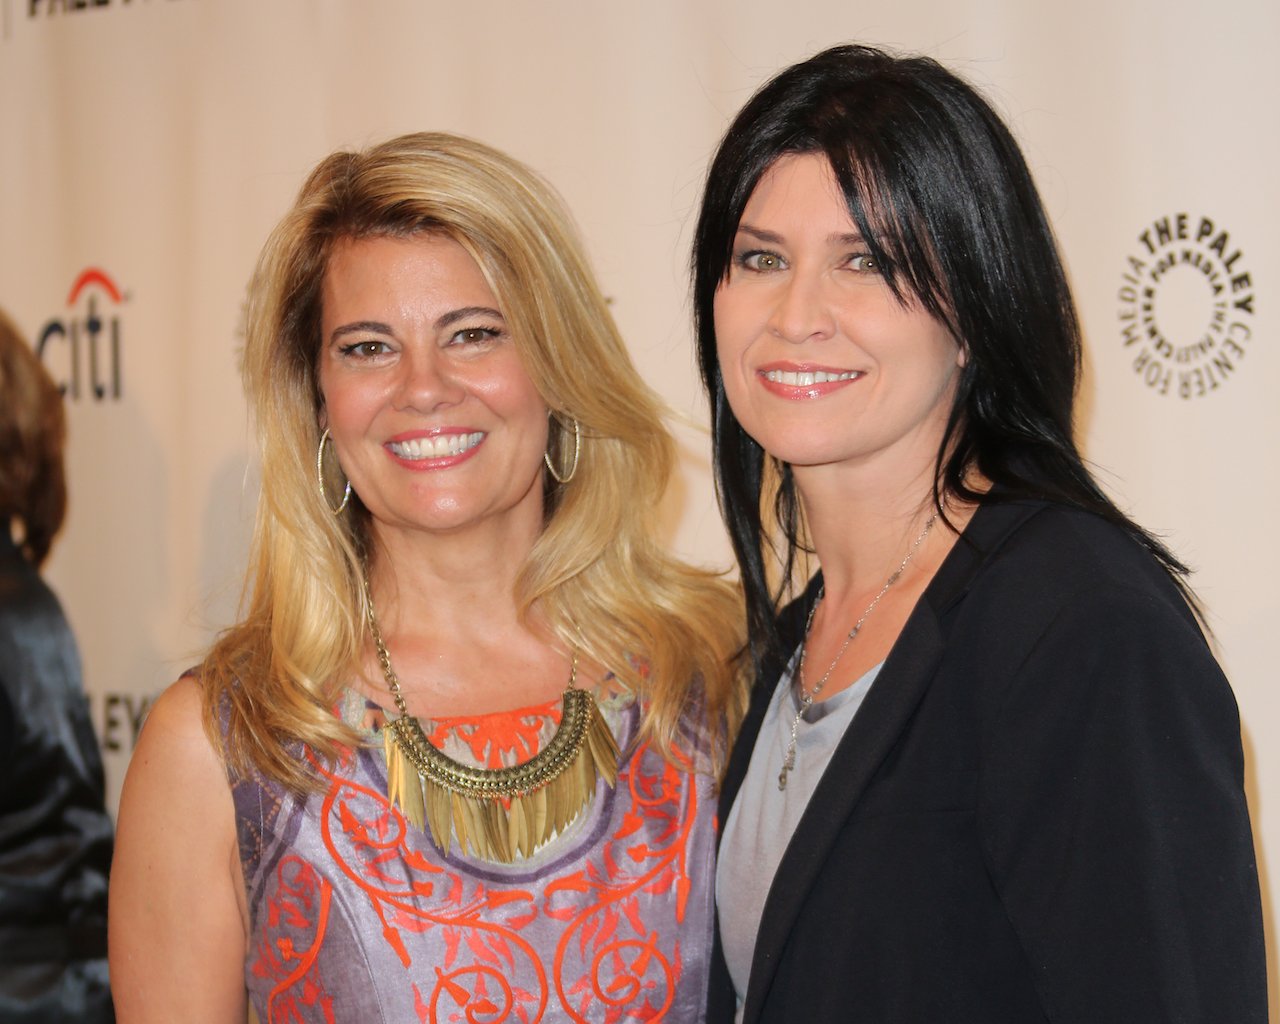   Actors Lisa Whelchel (L) and Nancy McKeon (R) attend the 2014 PaleyFest Fall TV preview of 'The Facts Of Life' 35th anniversary reunion at The Paley Center for Media